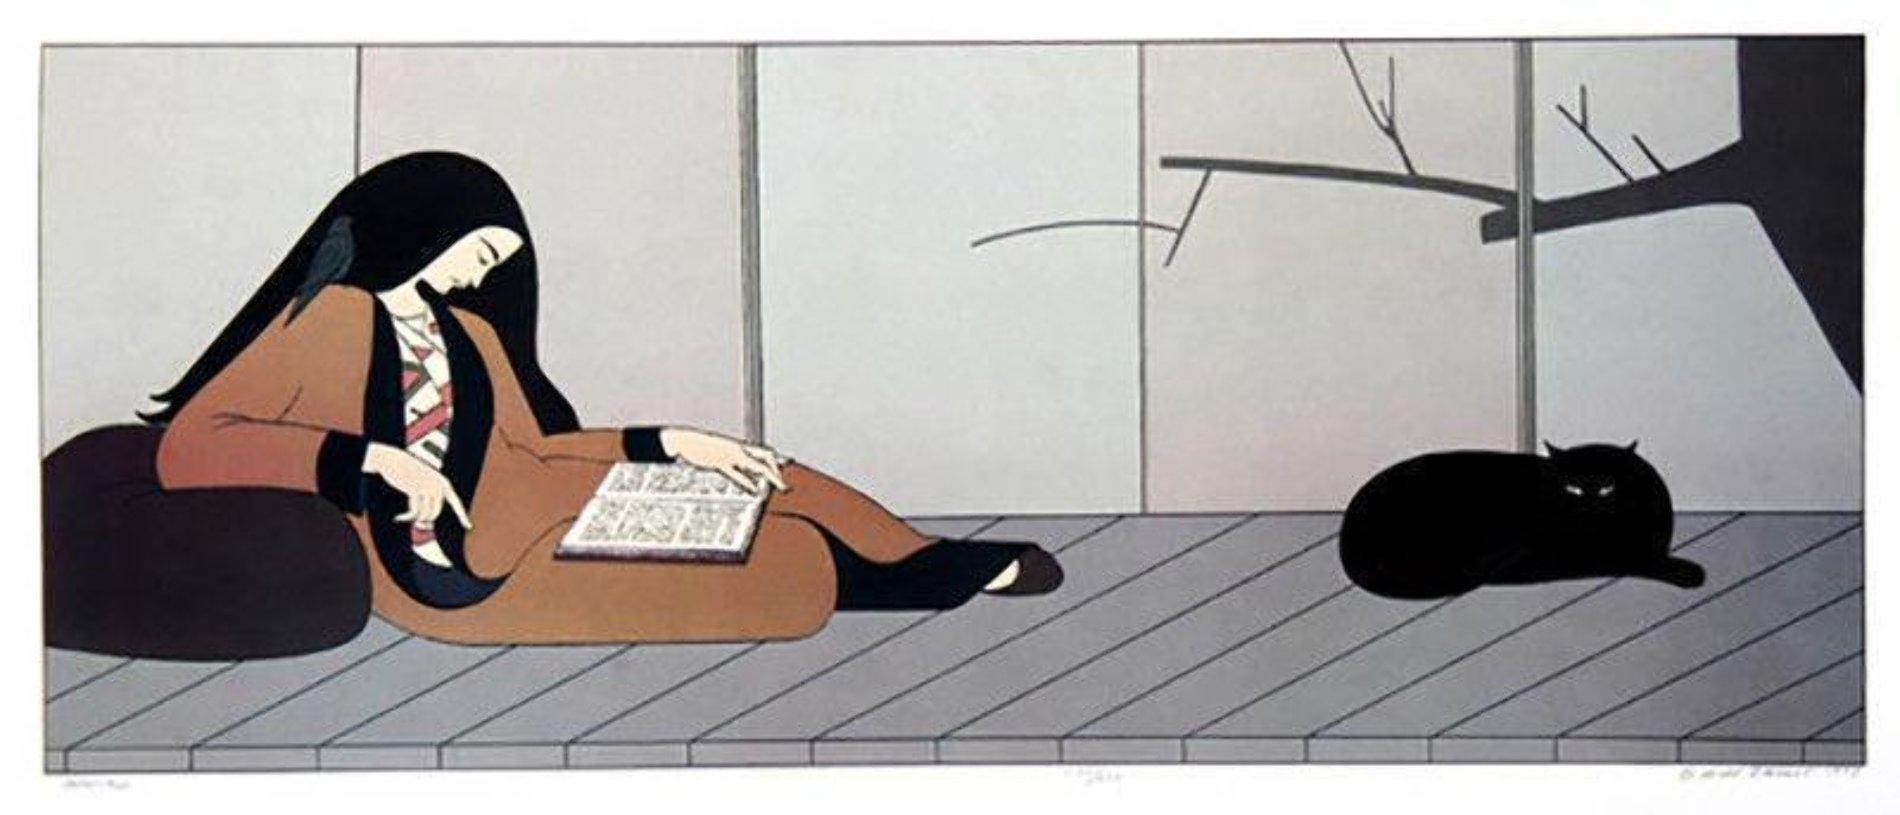 "Aurora"
1977
Will Barnet
Limited Edition Print
Serigraph on Paper
Size: 16 x 40 in    41 x 102 cm
Edition: From the Edition of 250
Hand Signed : Hand Signed And Numbered By the Artist
Condition: Excellent
Not Framed
Will Barnet American Artist: b.